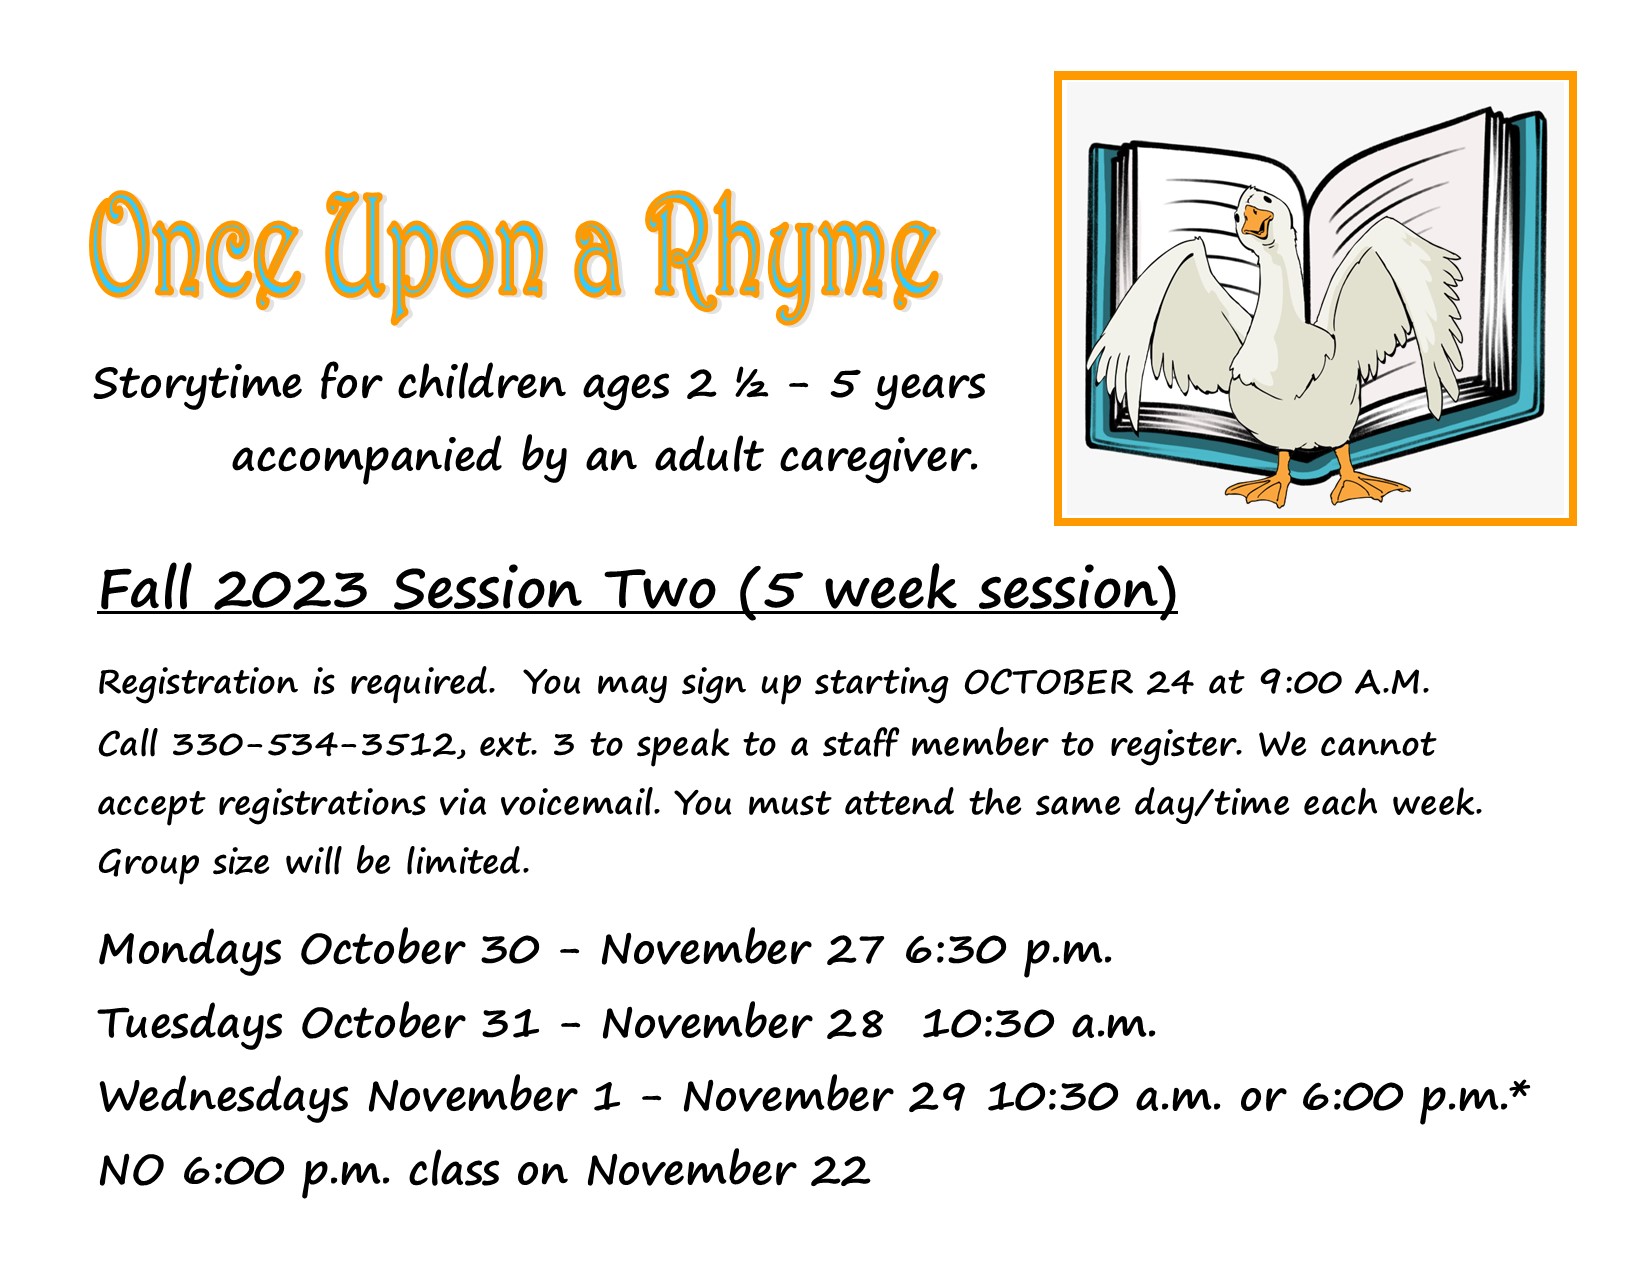 Once Upon a Rhyme Fall Session 2023